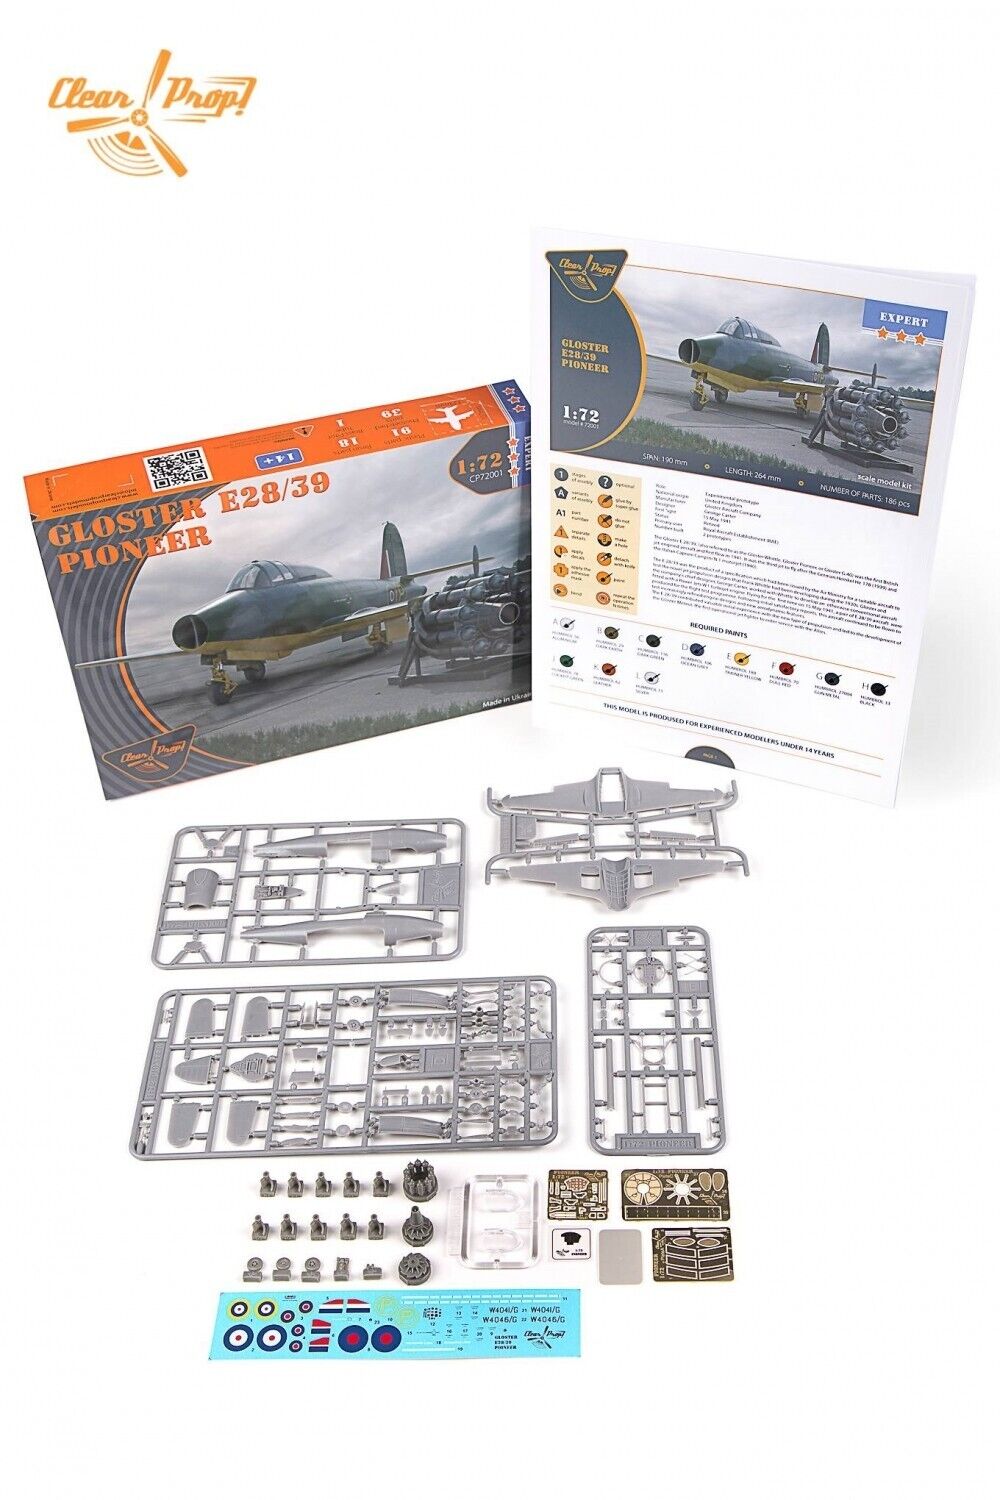 CLEAR PROP MODELS Gloster E28/39 Pioneer Nr.: 72001 1:72